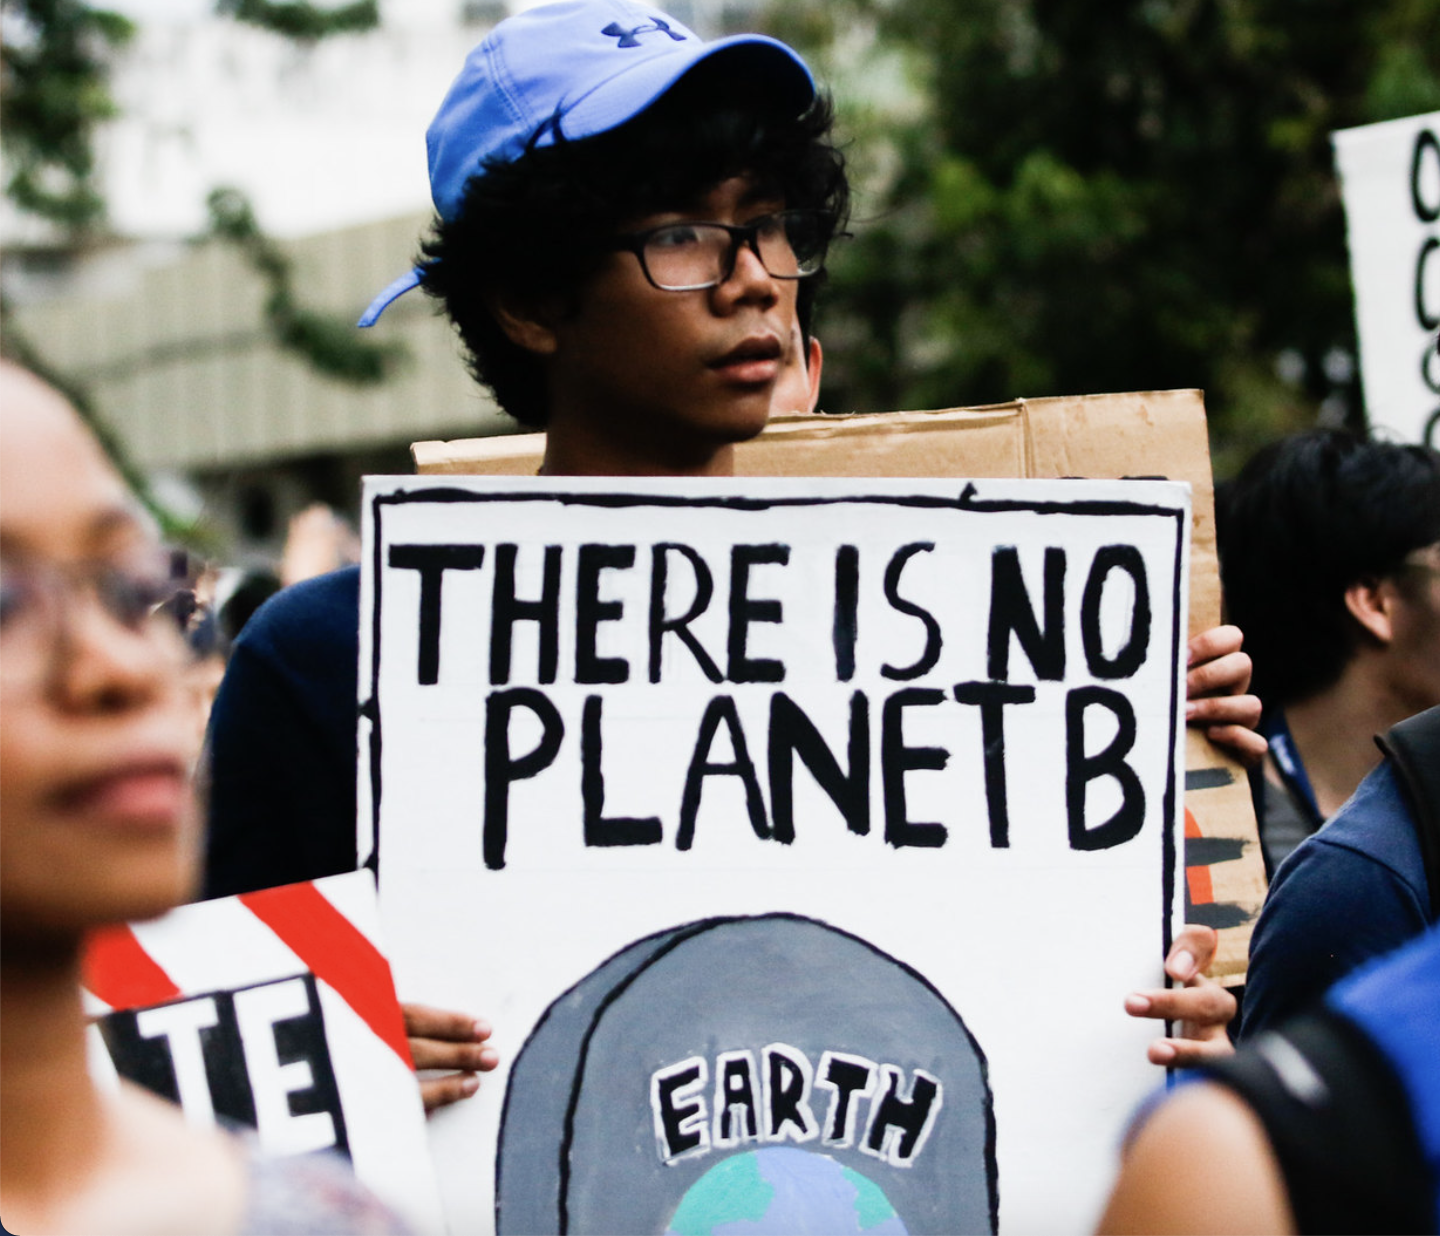 A young man carrying a sign that says "There is no Planet B"